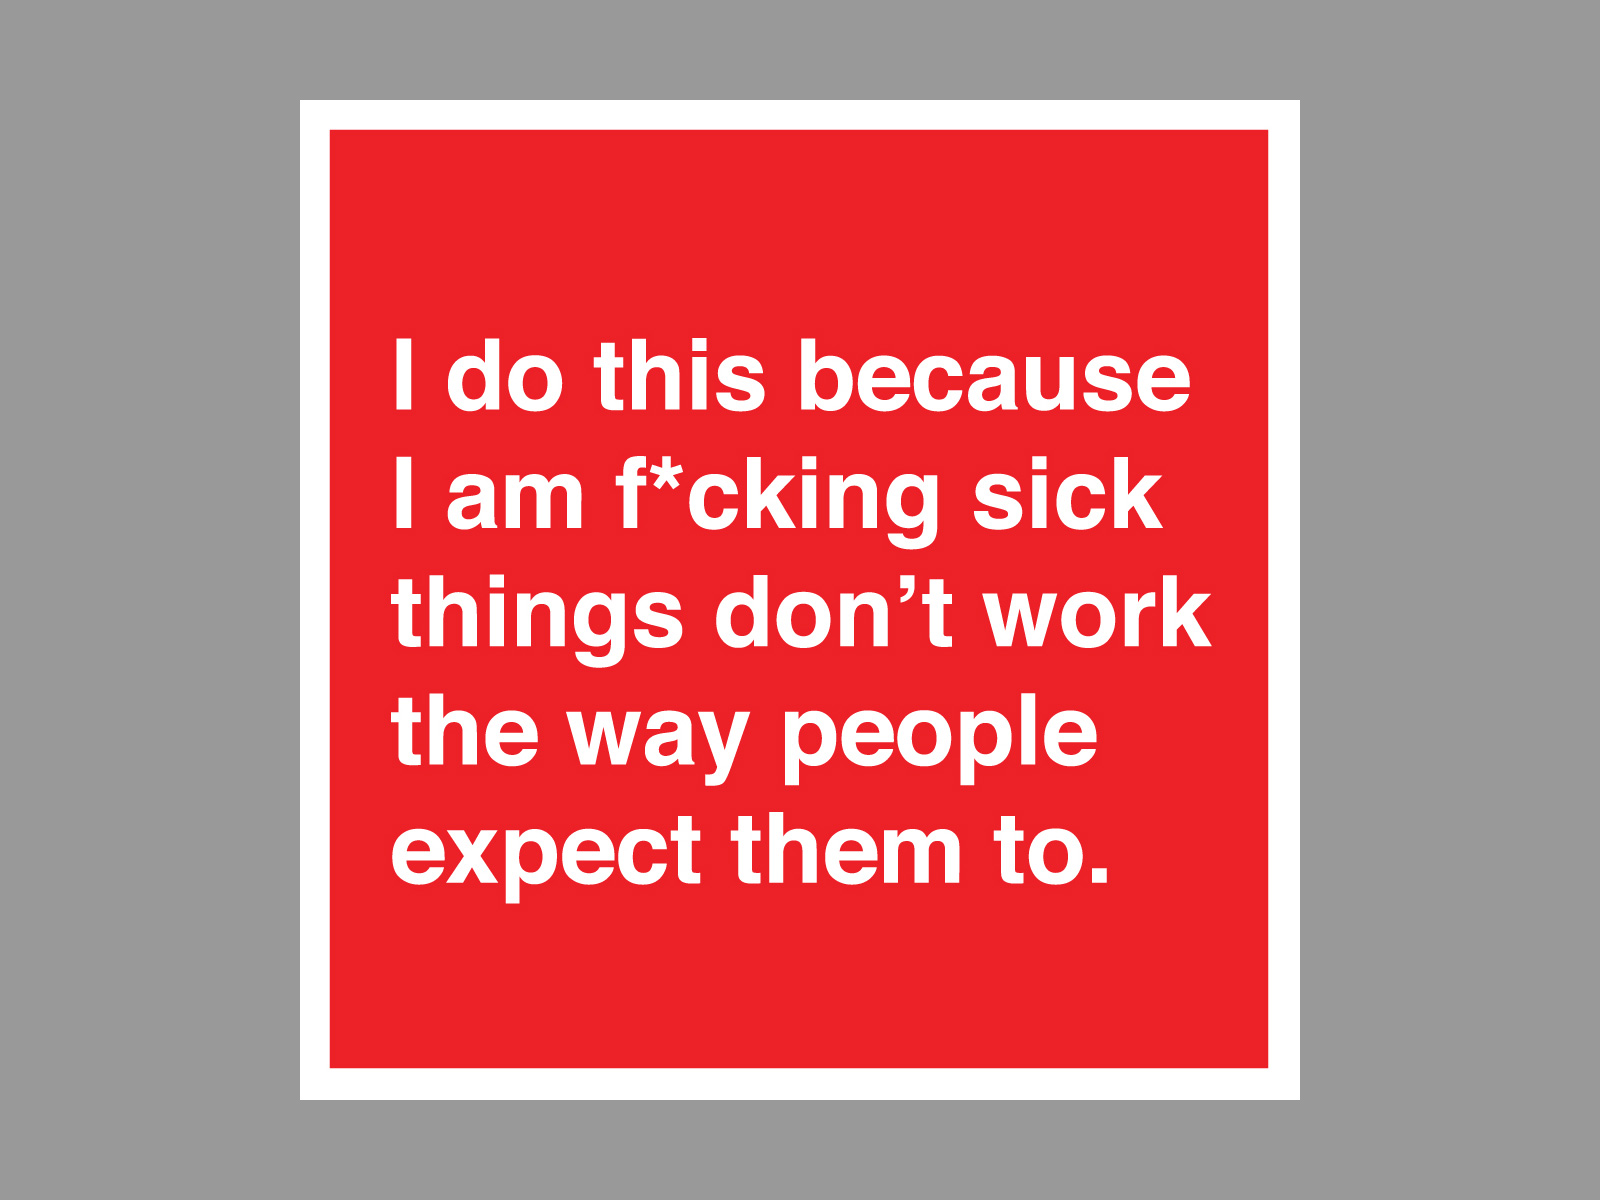 I do this because I am f*cking sick things do't work people expect them to sticker